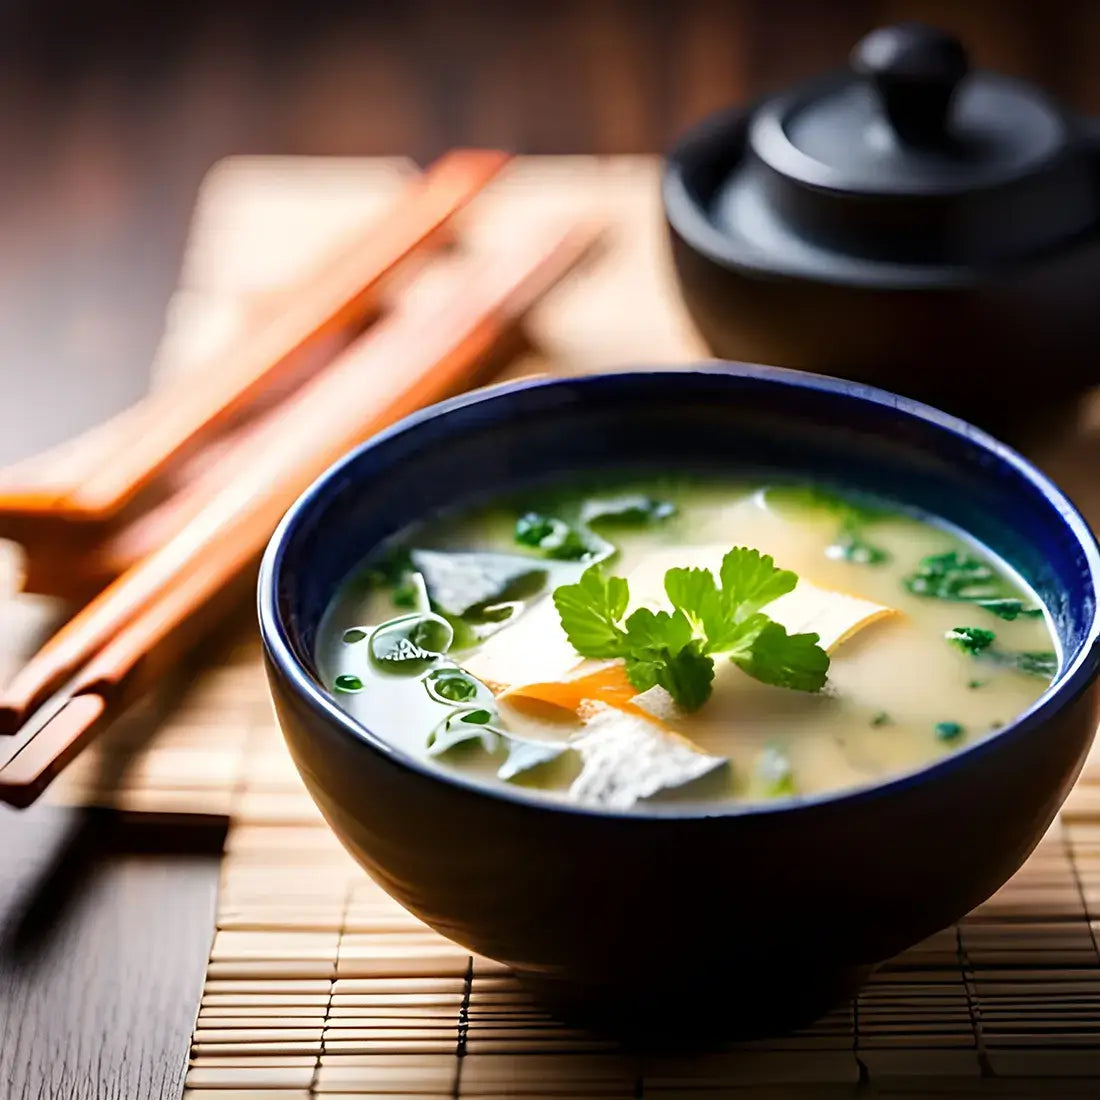 What is Miso? | Miso soup image | Marukome USA